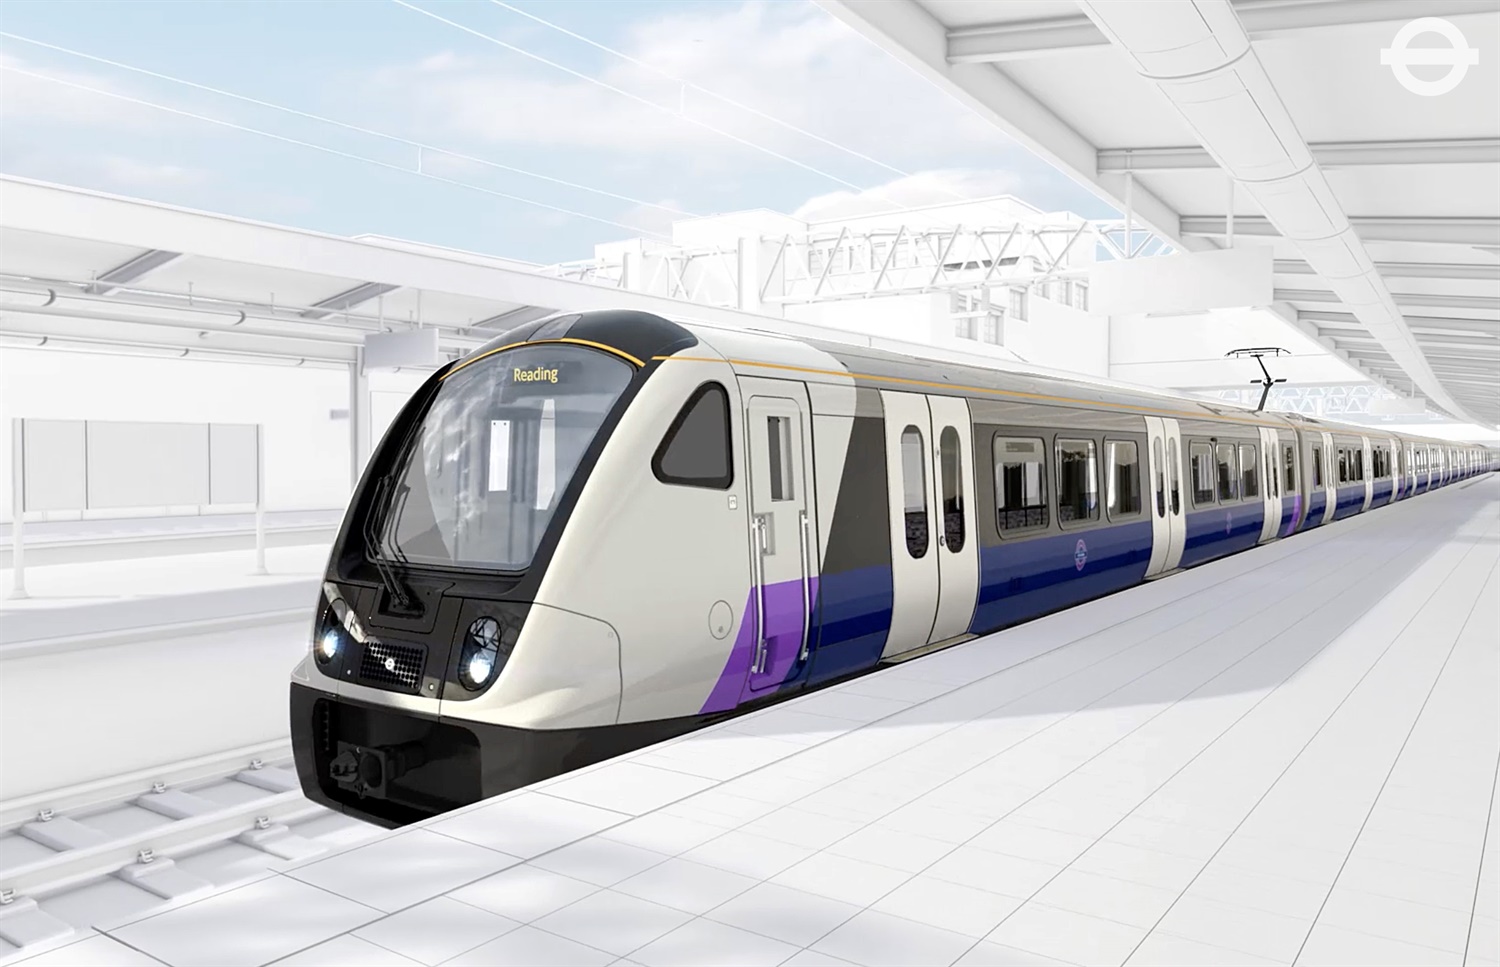 Crossrail unveils first images of Bombardier’s Aventra train design